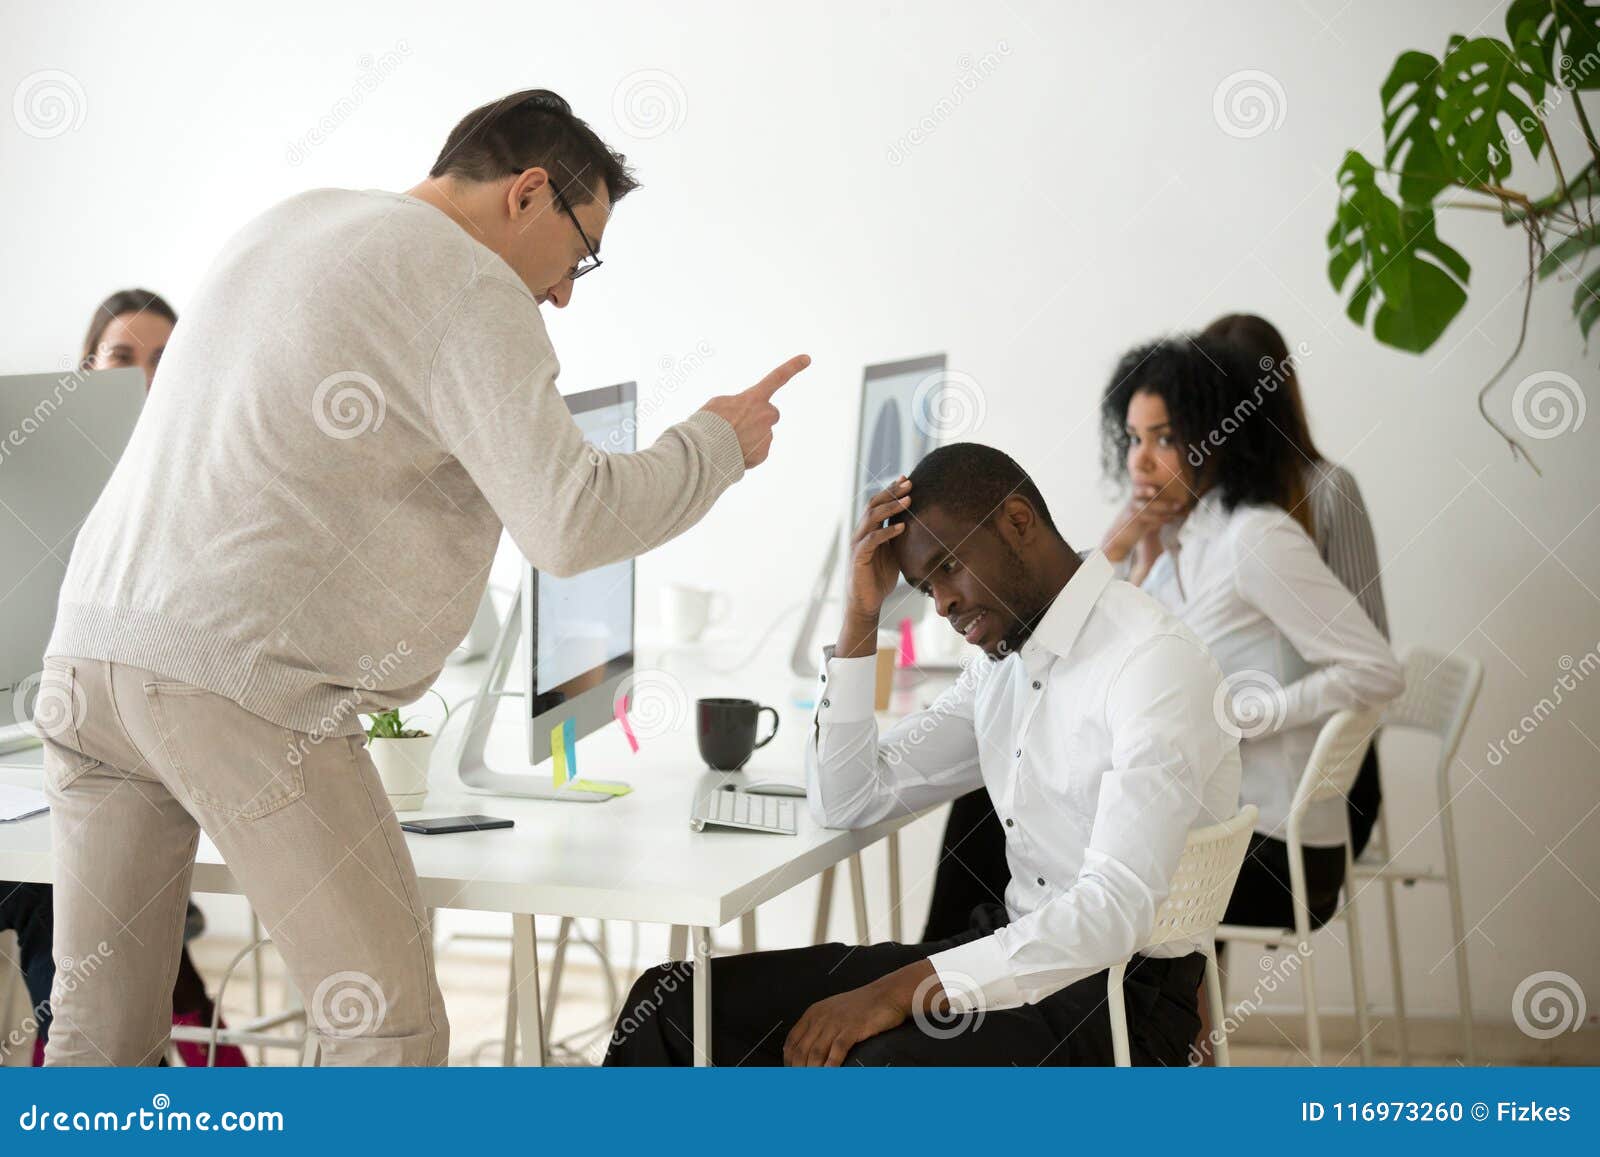 angry white boss scolding rebuking incompetent black employee in